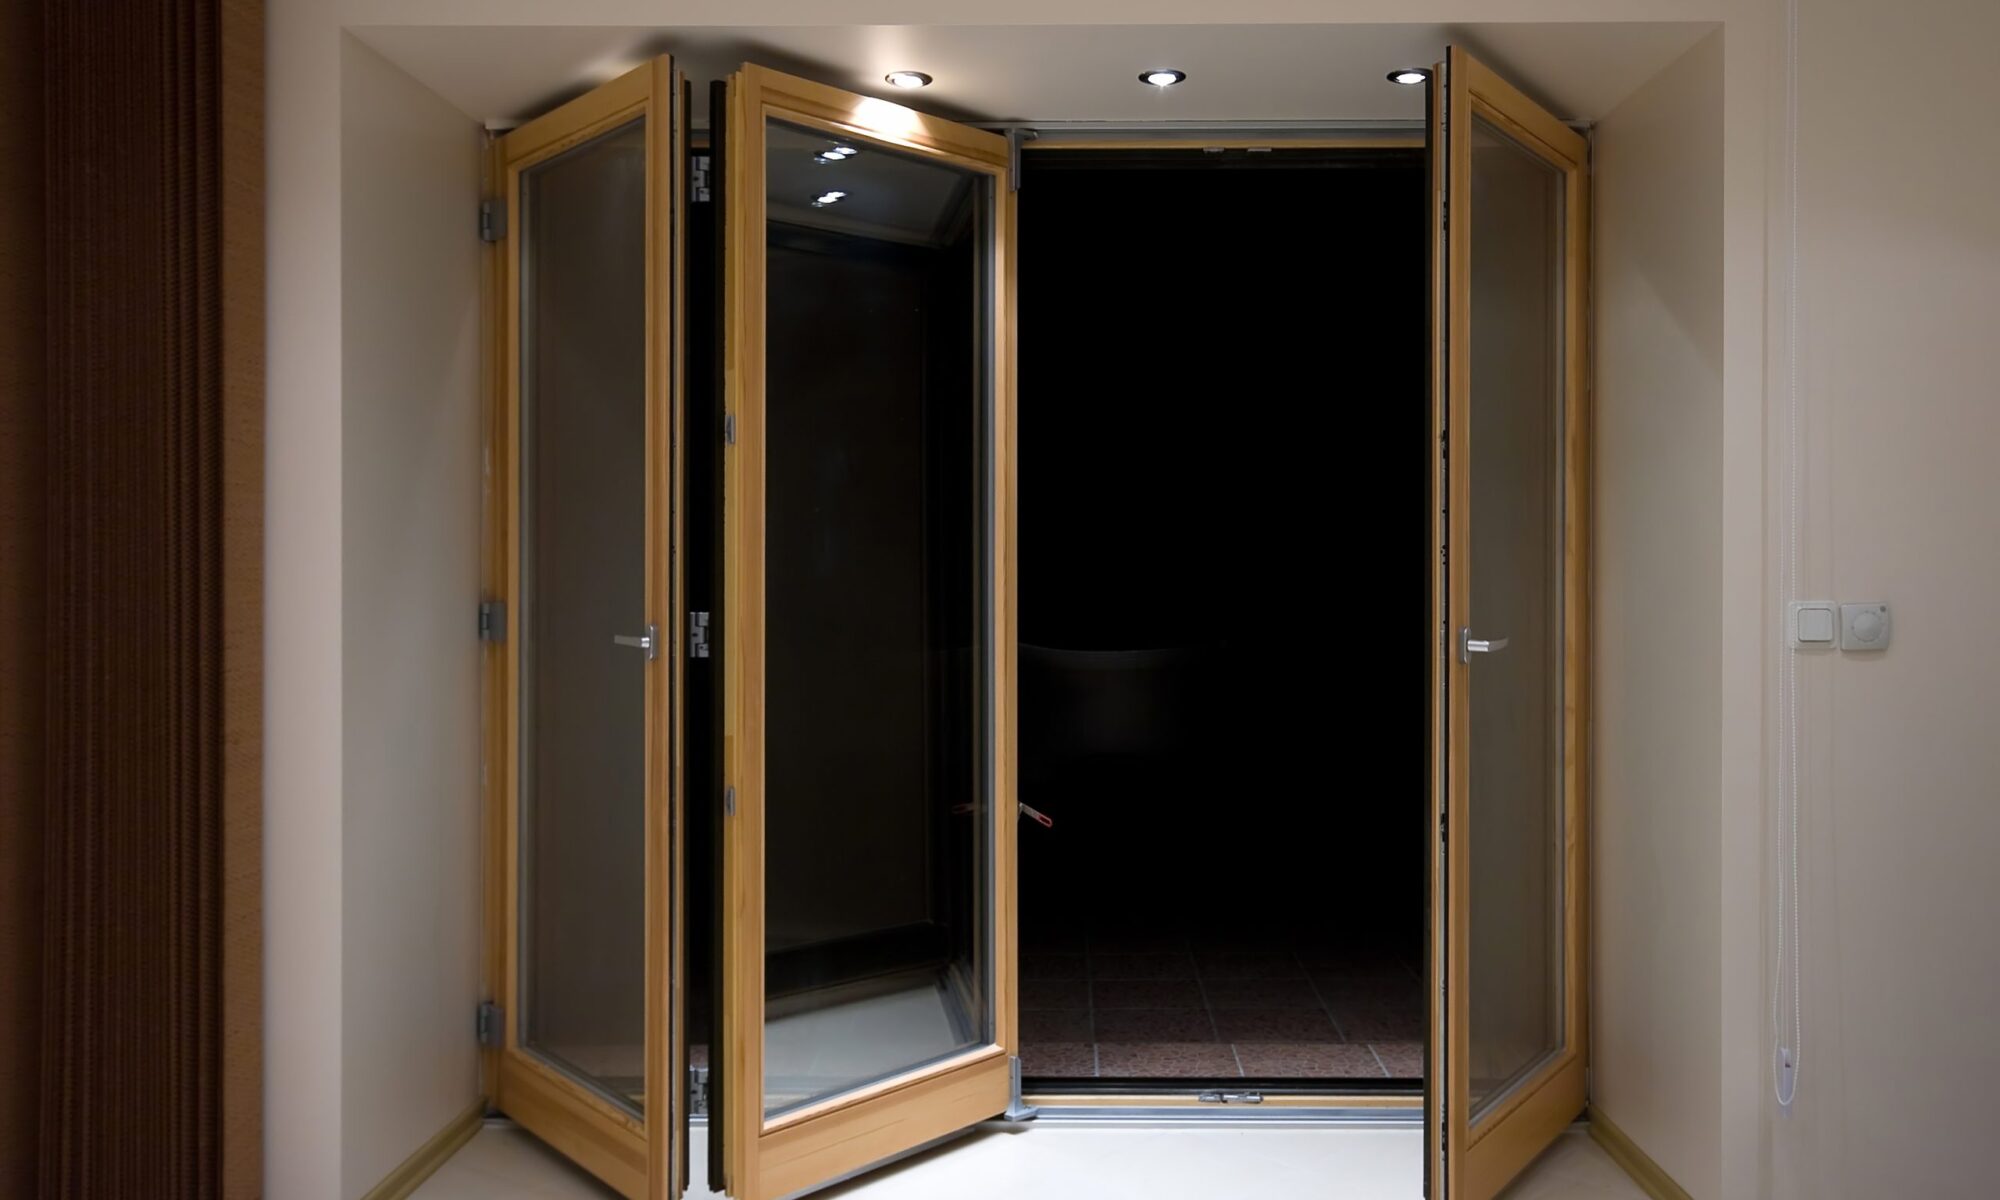 How to Make the Cost-Efficient Choice for uPVC Doors?